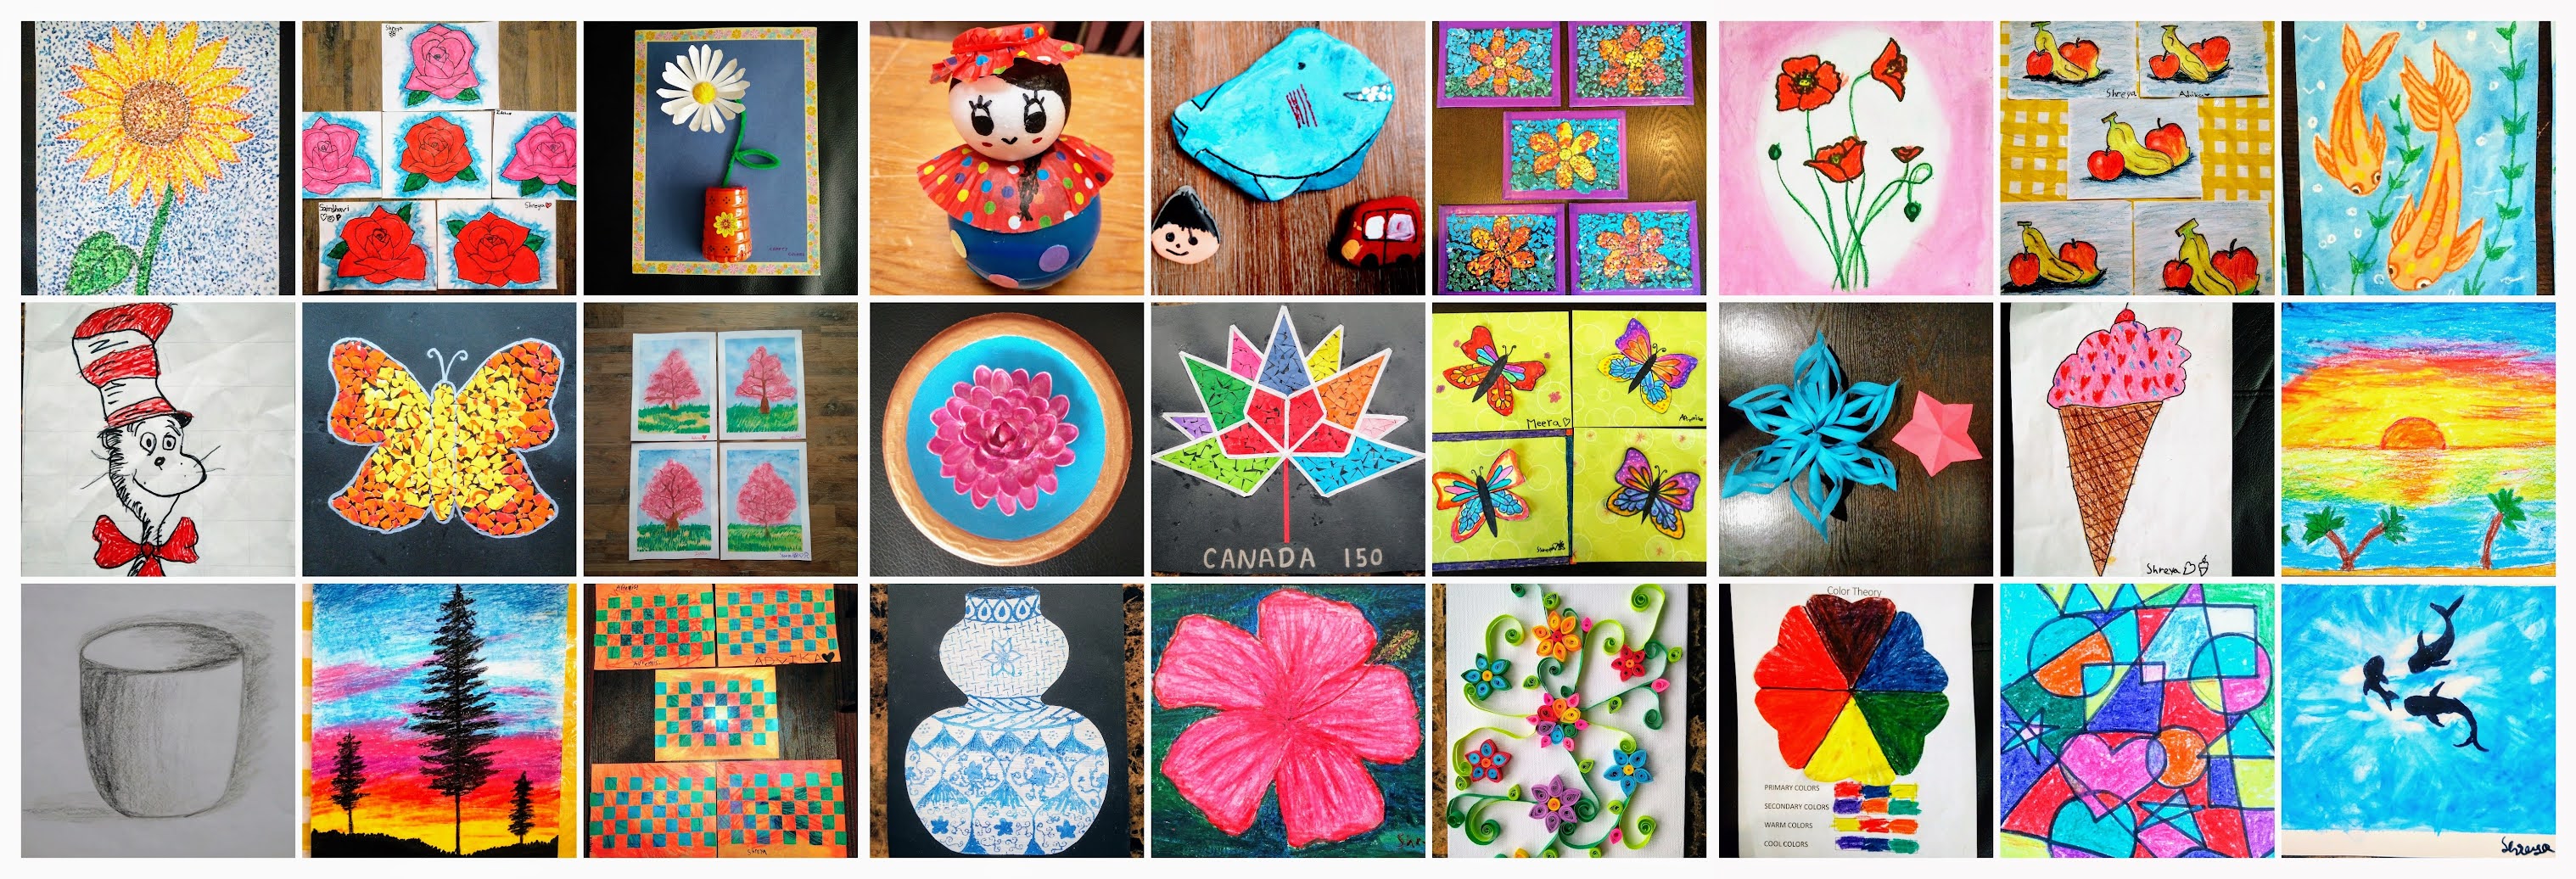 Art Projects for Tweens - 12 Beautiful and Easy Ideas, Art Projects 